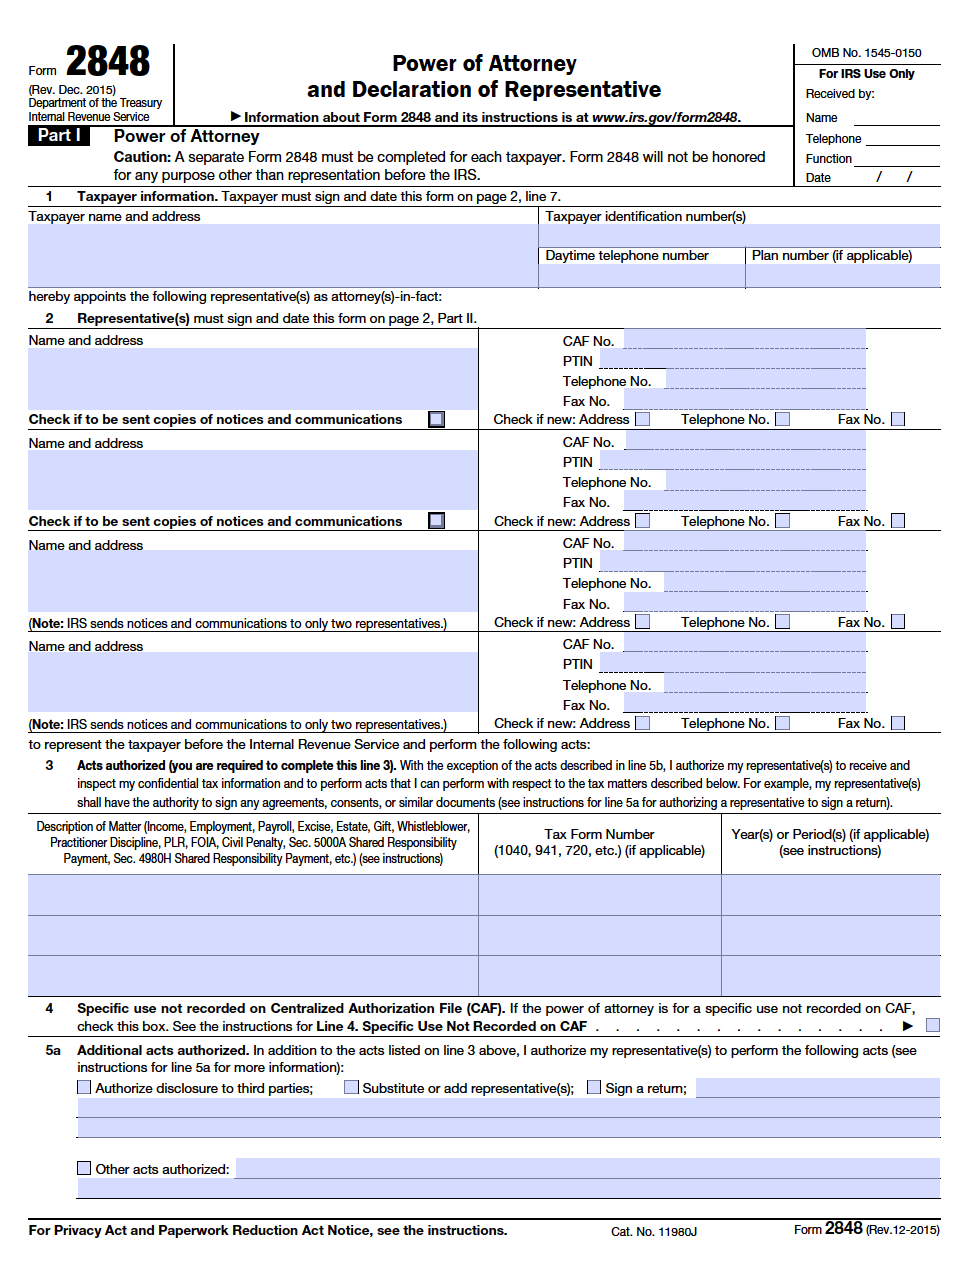 IRS Power Of Attorney Form 2848 Year 2016 Power Of 